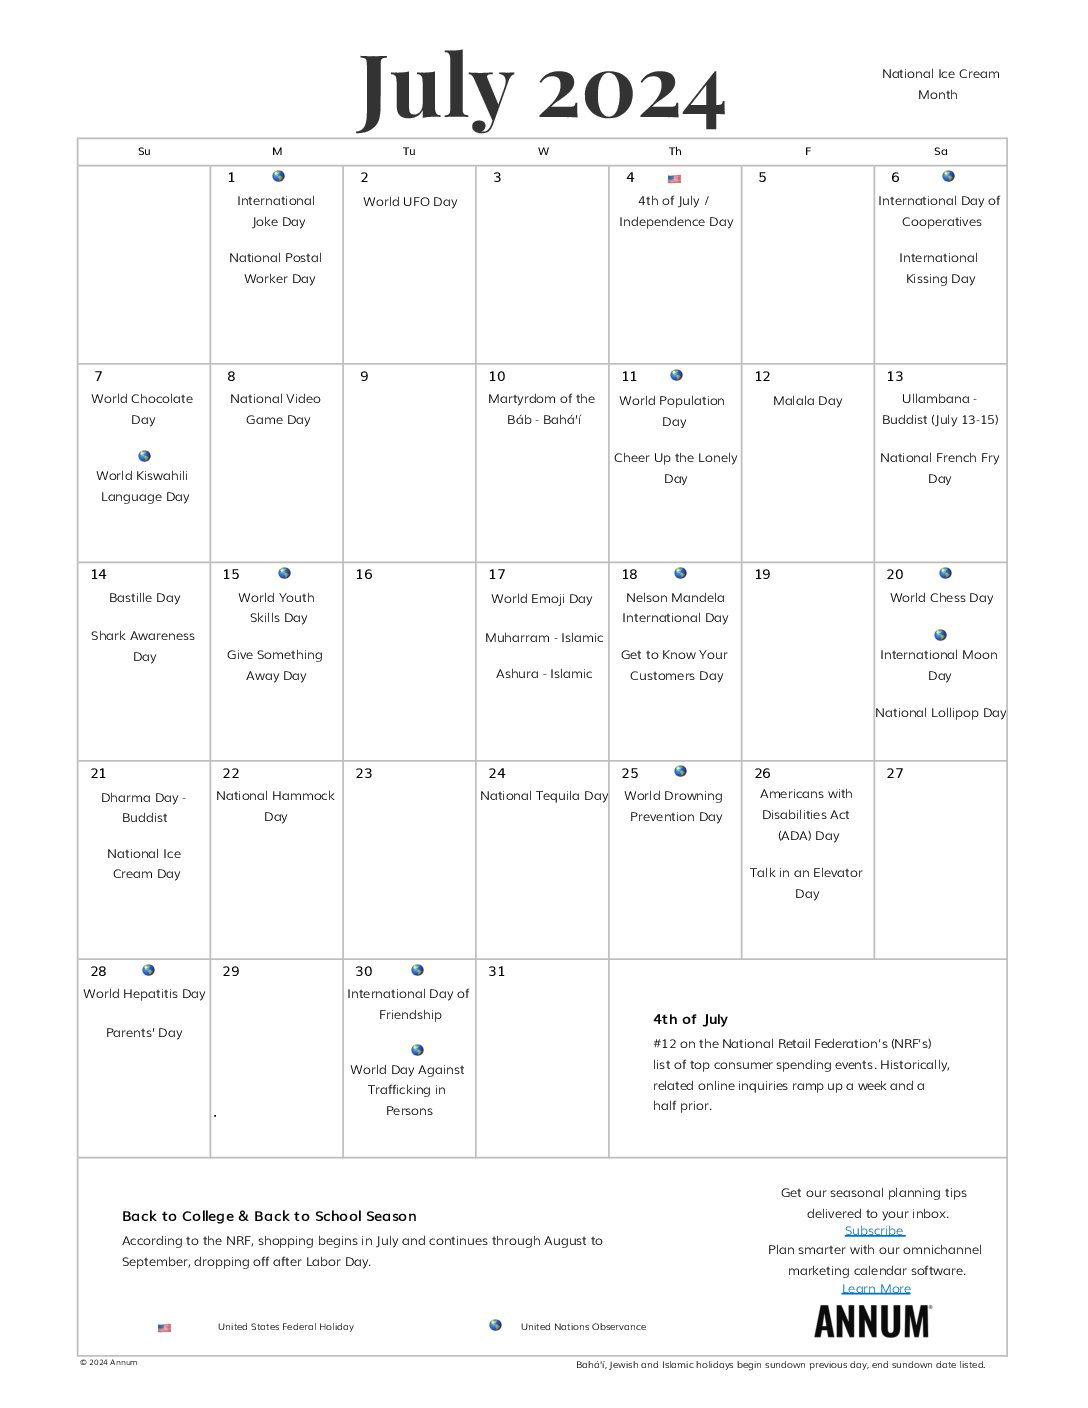 Printable July 2024 Calendar | July Holidays | Annum intended for Calendar of Events July 2024